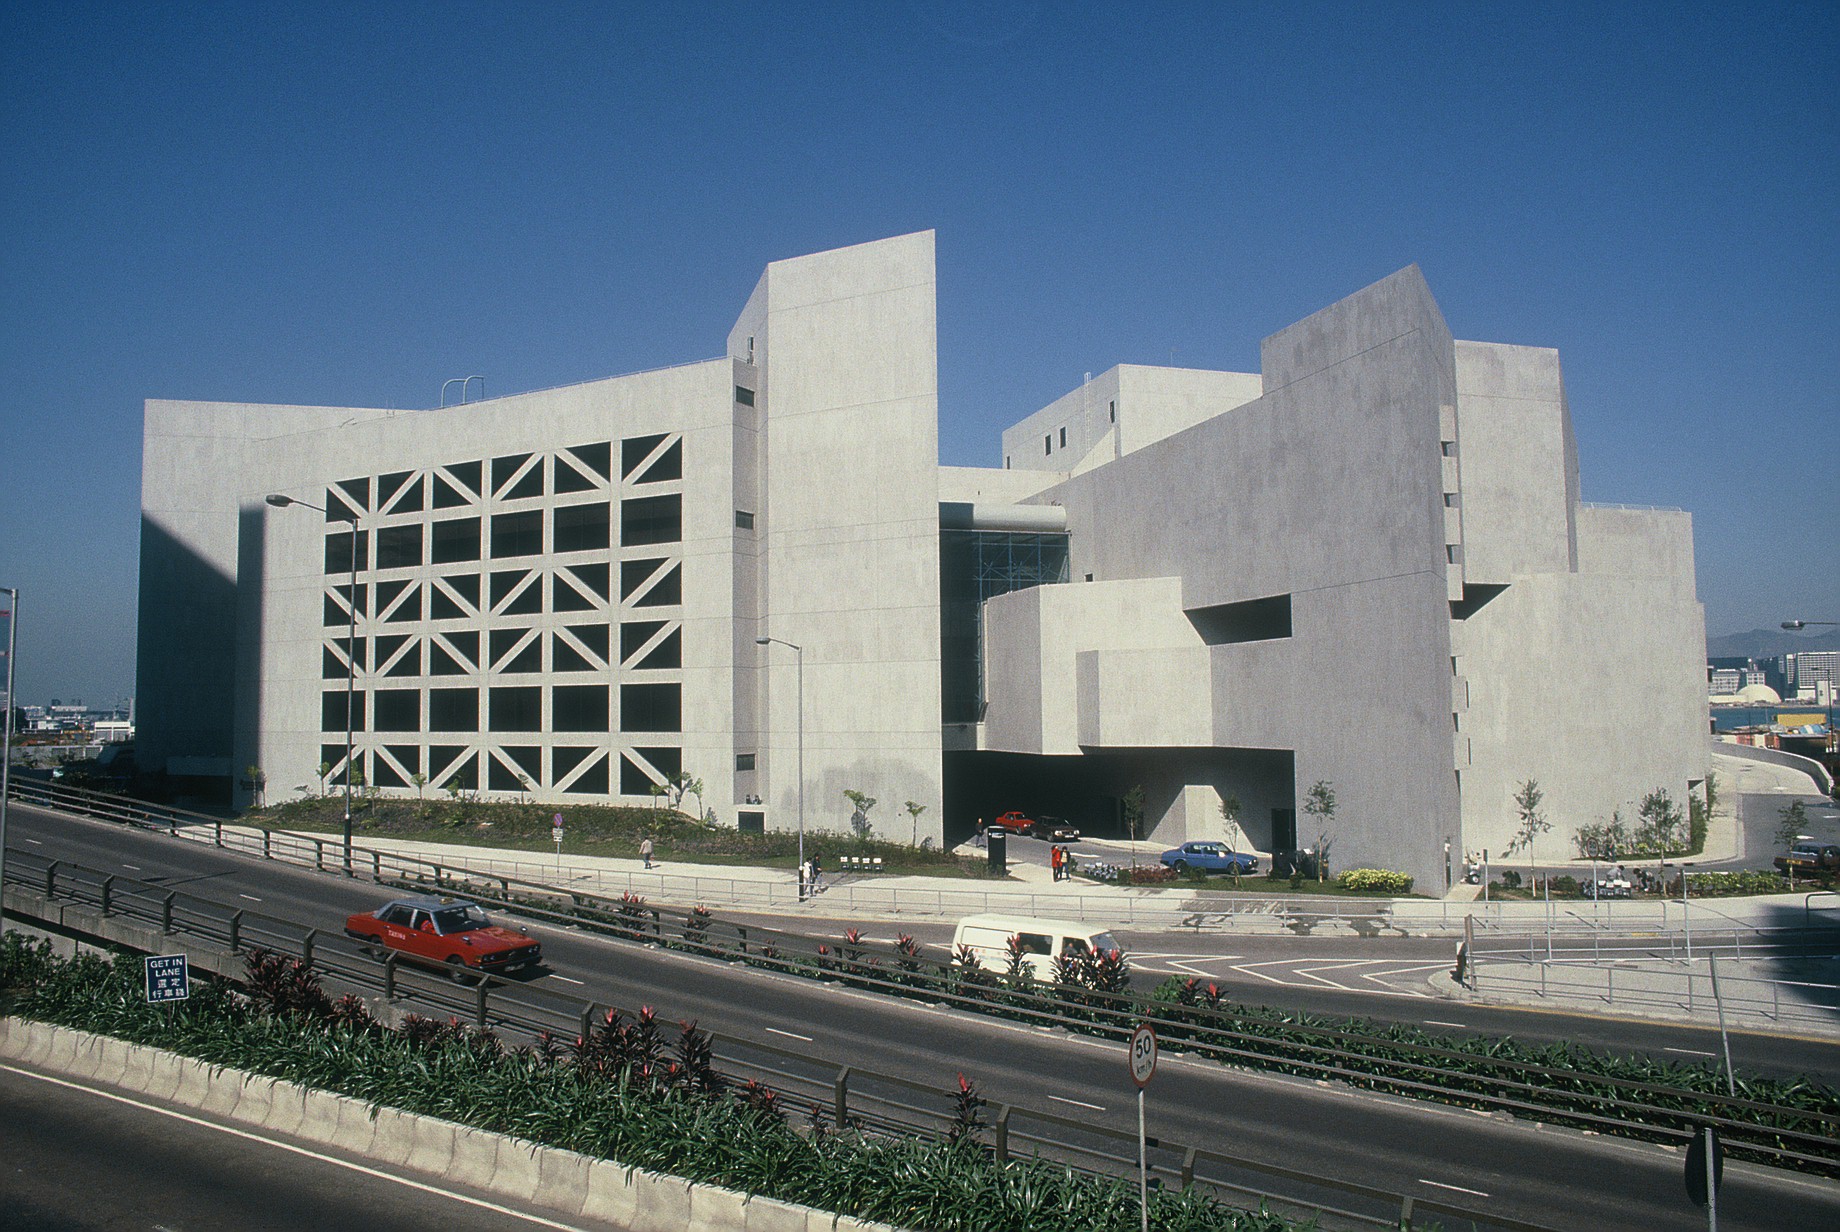 Wanchai campus in Early 1990s